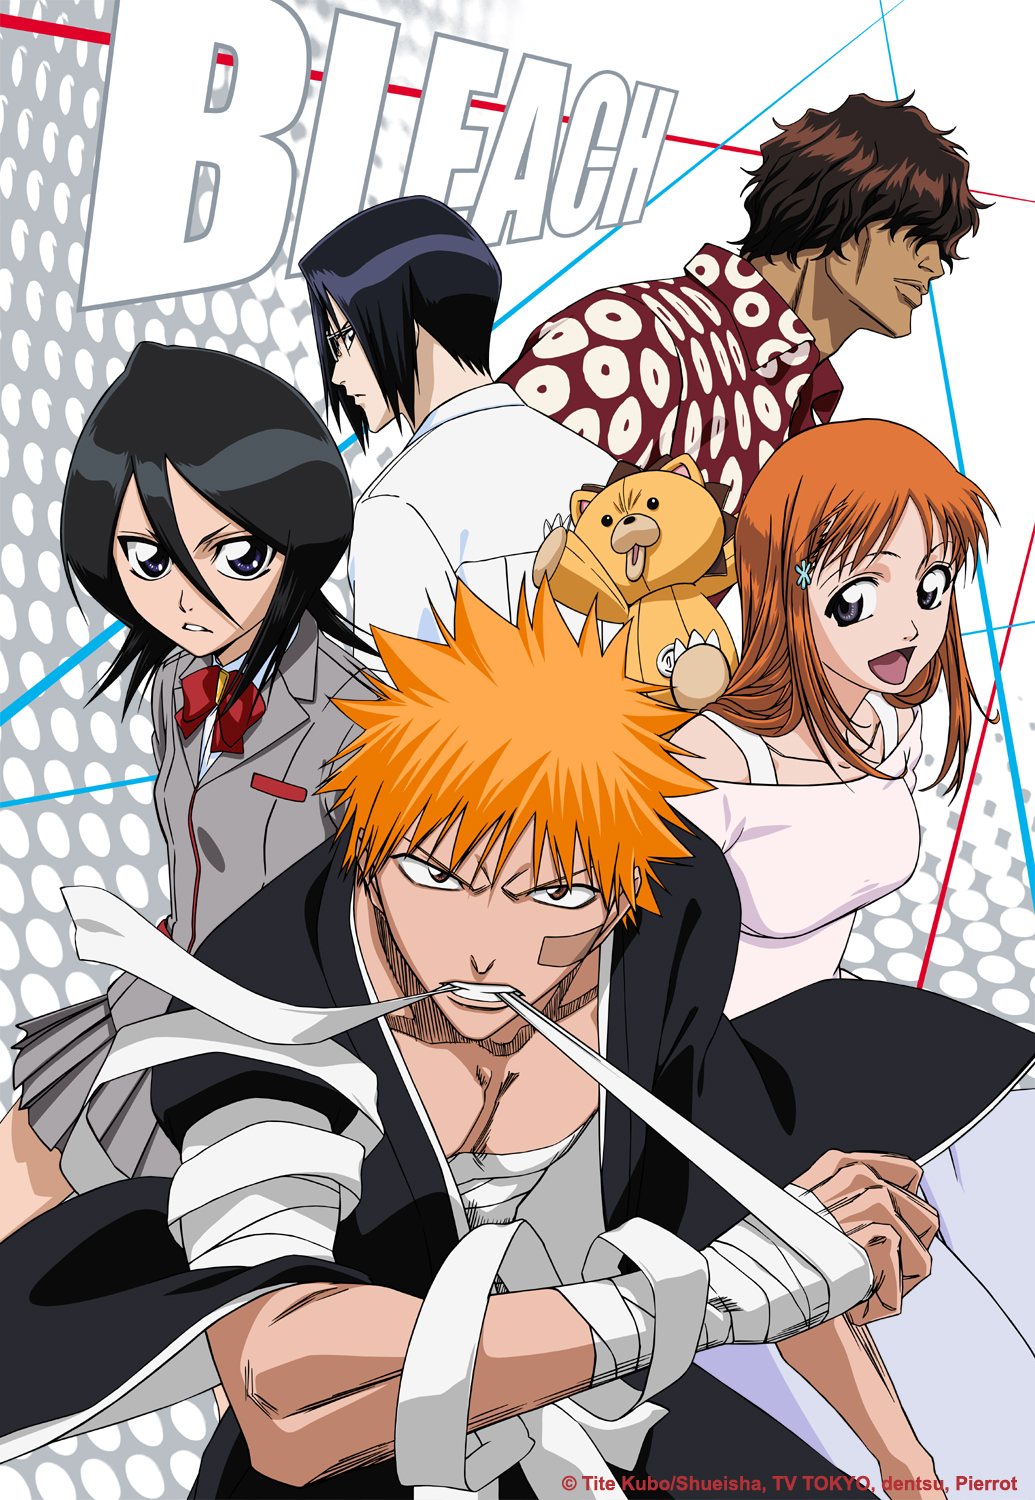 Rumor: Disney Lands Streaming Rights For Entirety Of 'Bleach' Anime  Including Upcoming 'Bleach: Thousand-Year Blood War' - Bounding Into Comics